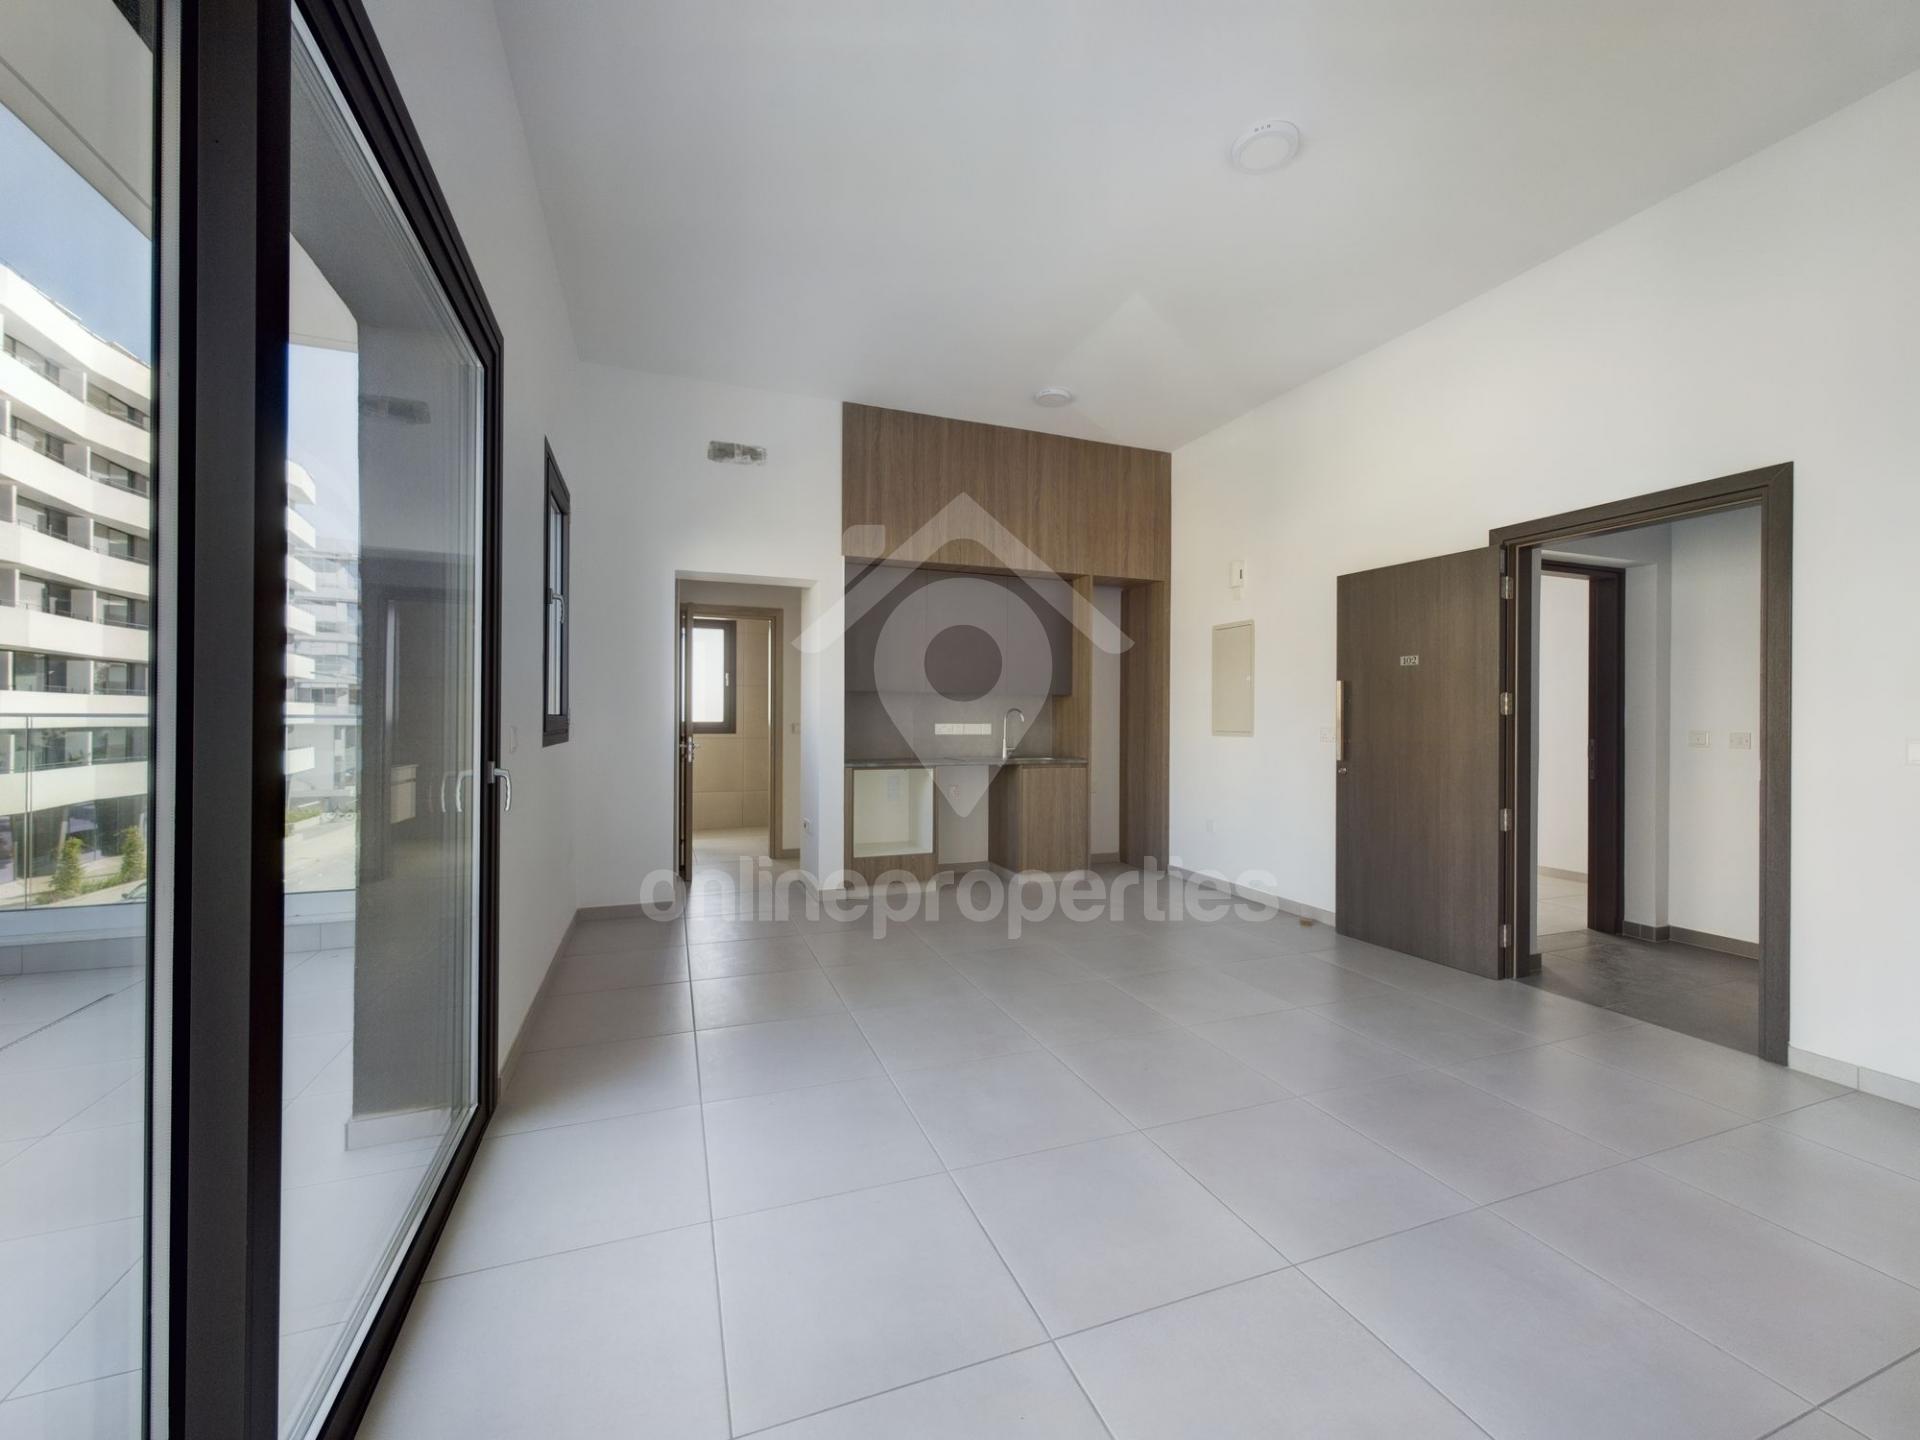  Contemporary one bed city apartment, great investment, high ROI 